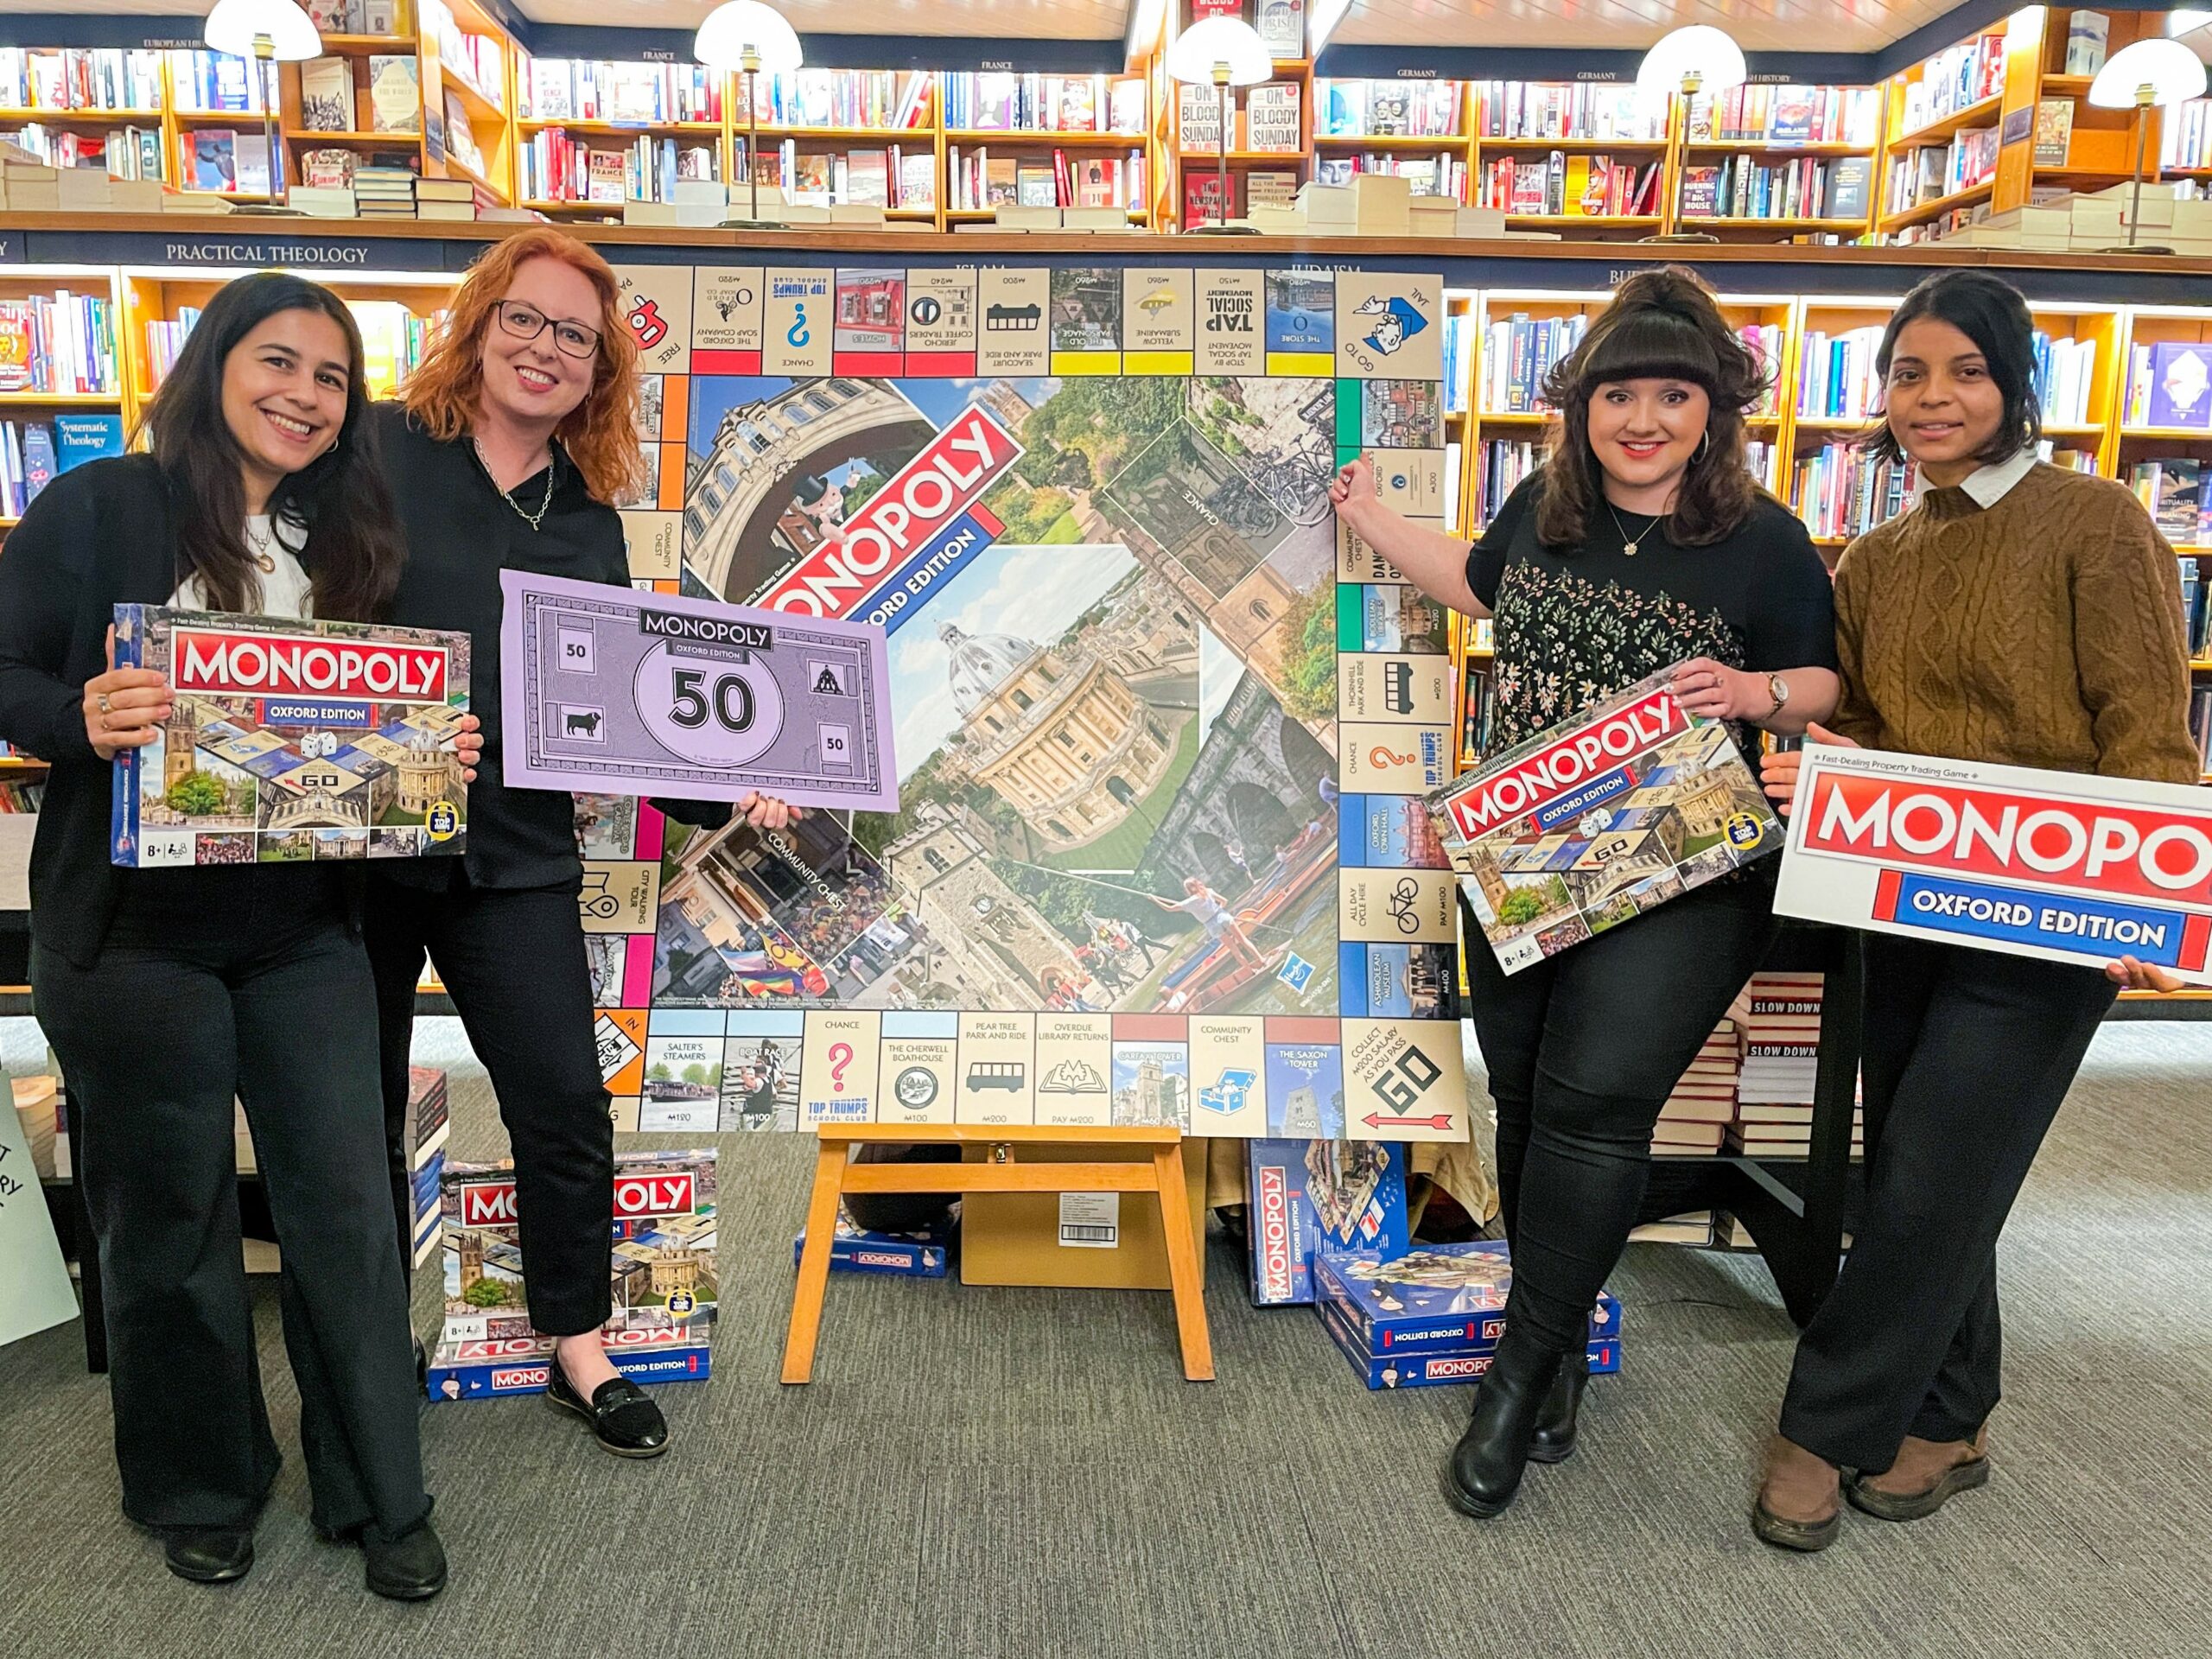 MONOPOLY: Oxford Edition – featuring St Clare’s!